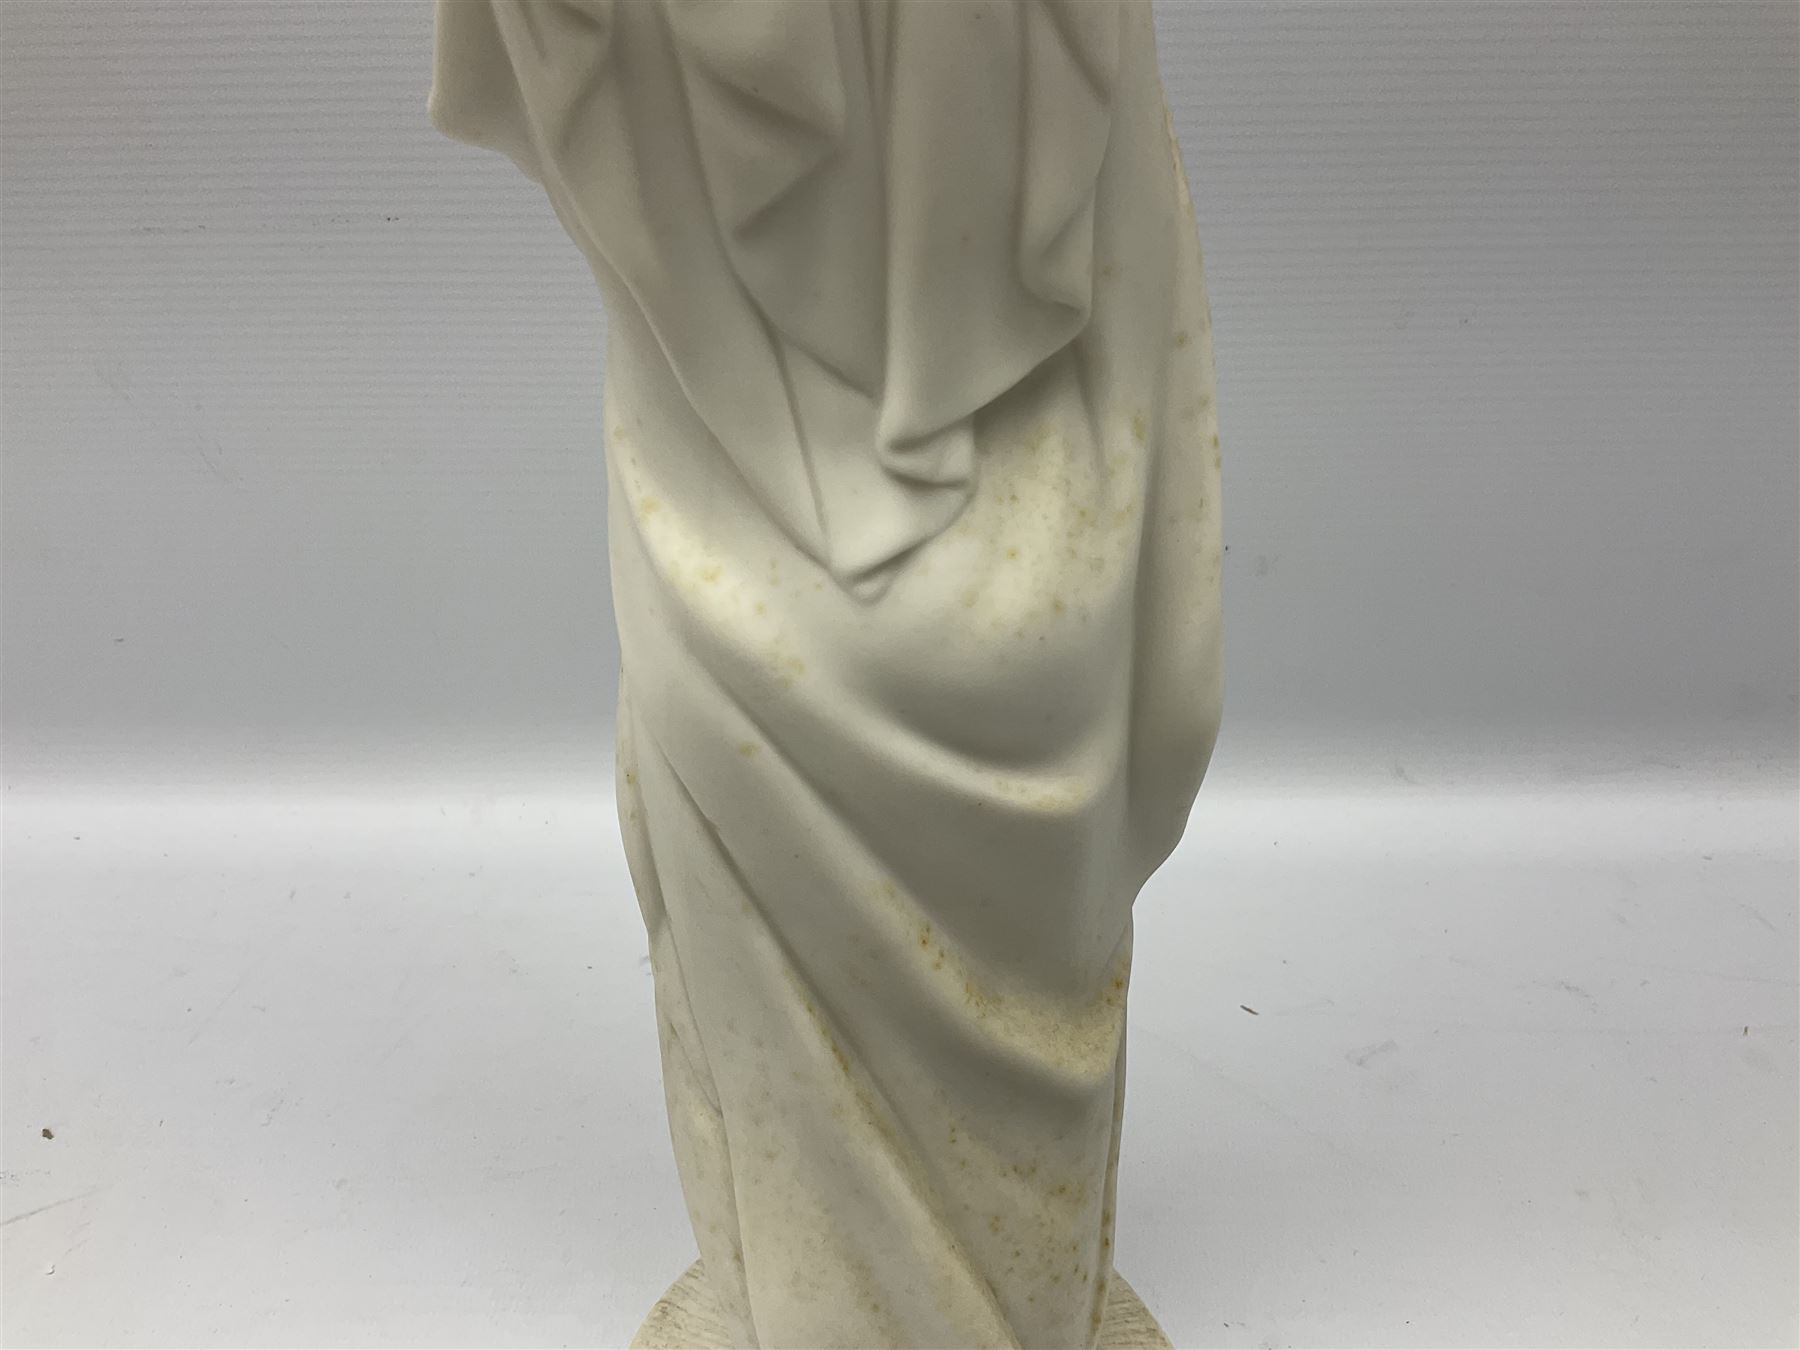 Parian ware figure of a woman in classical dress with one hand raised - Image 6 of 8